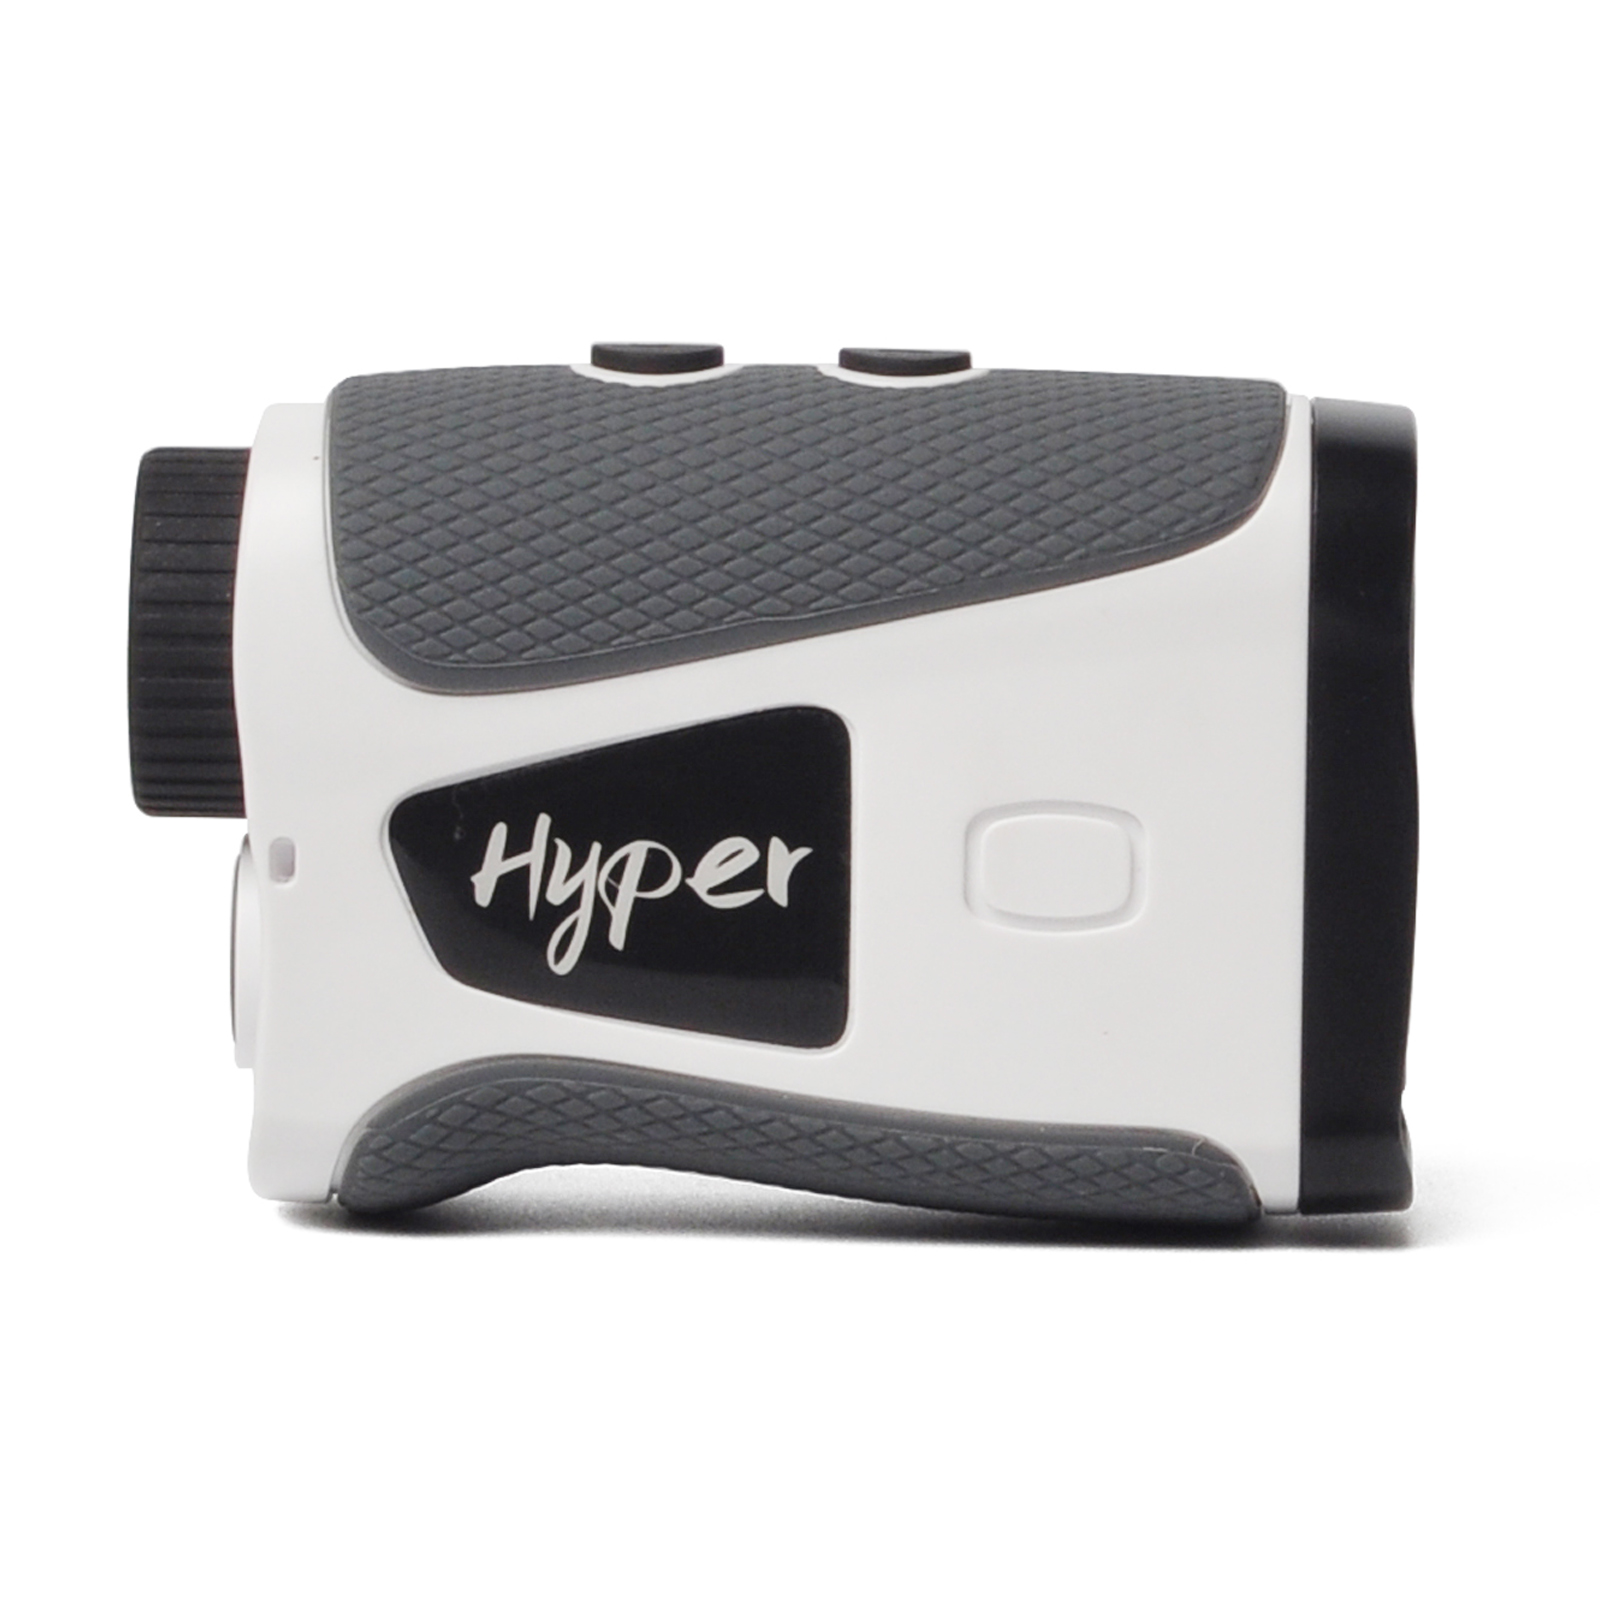 Golf Laser Rangefinder 600-1500M with Slope, Rechargeable Battery & Vibration Lock – Perfect for Golfing & Surveying